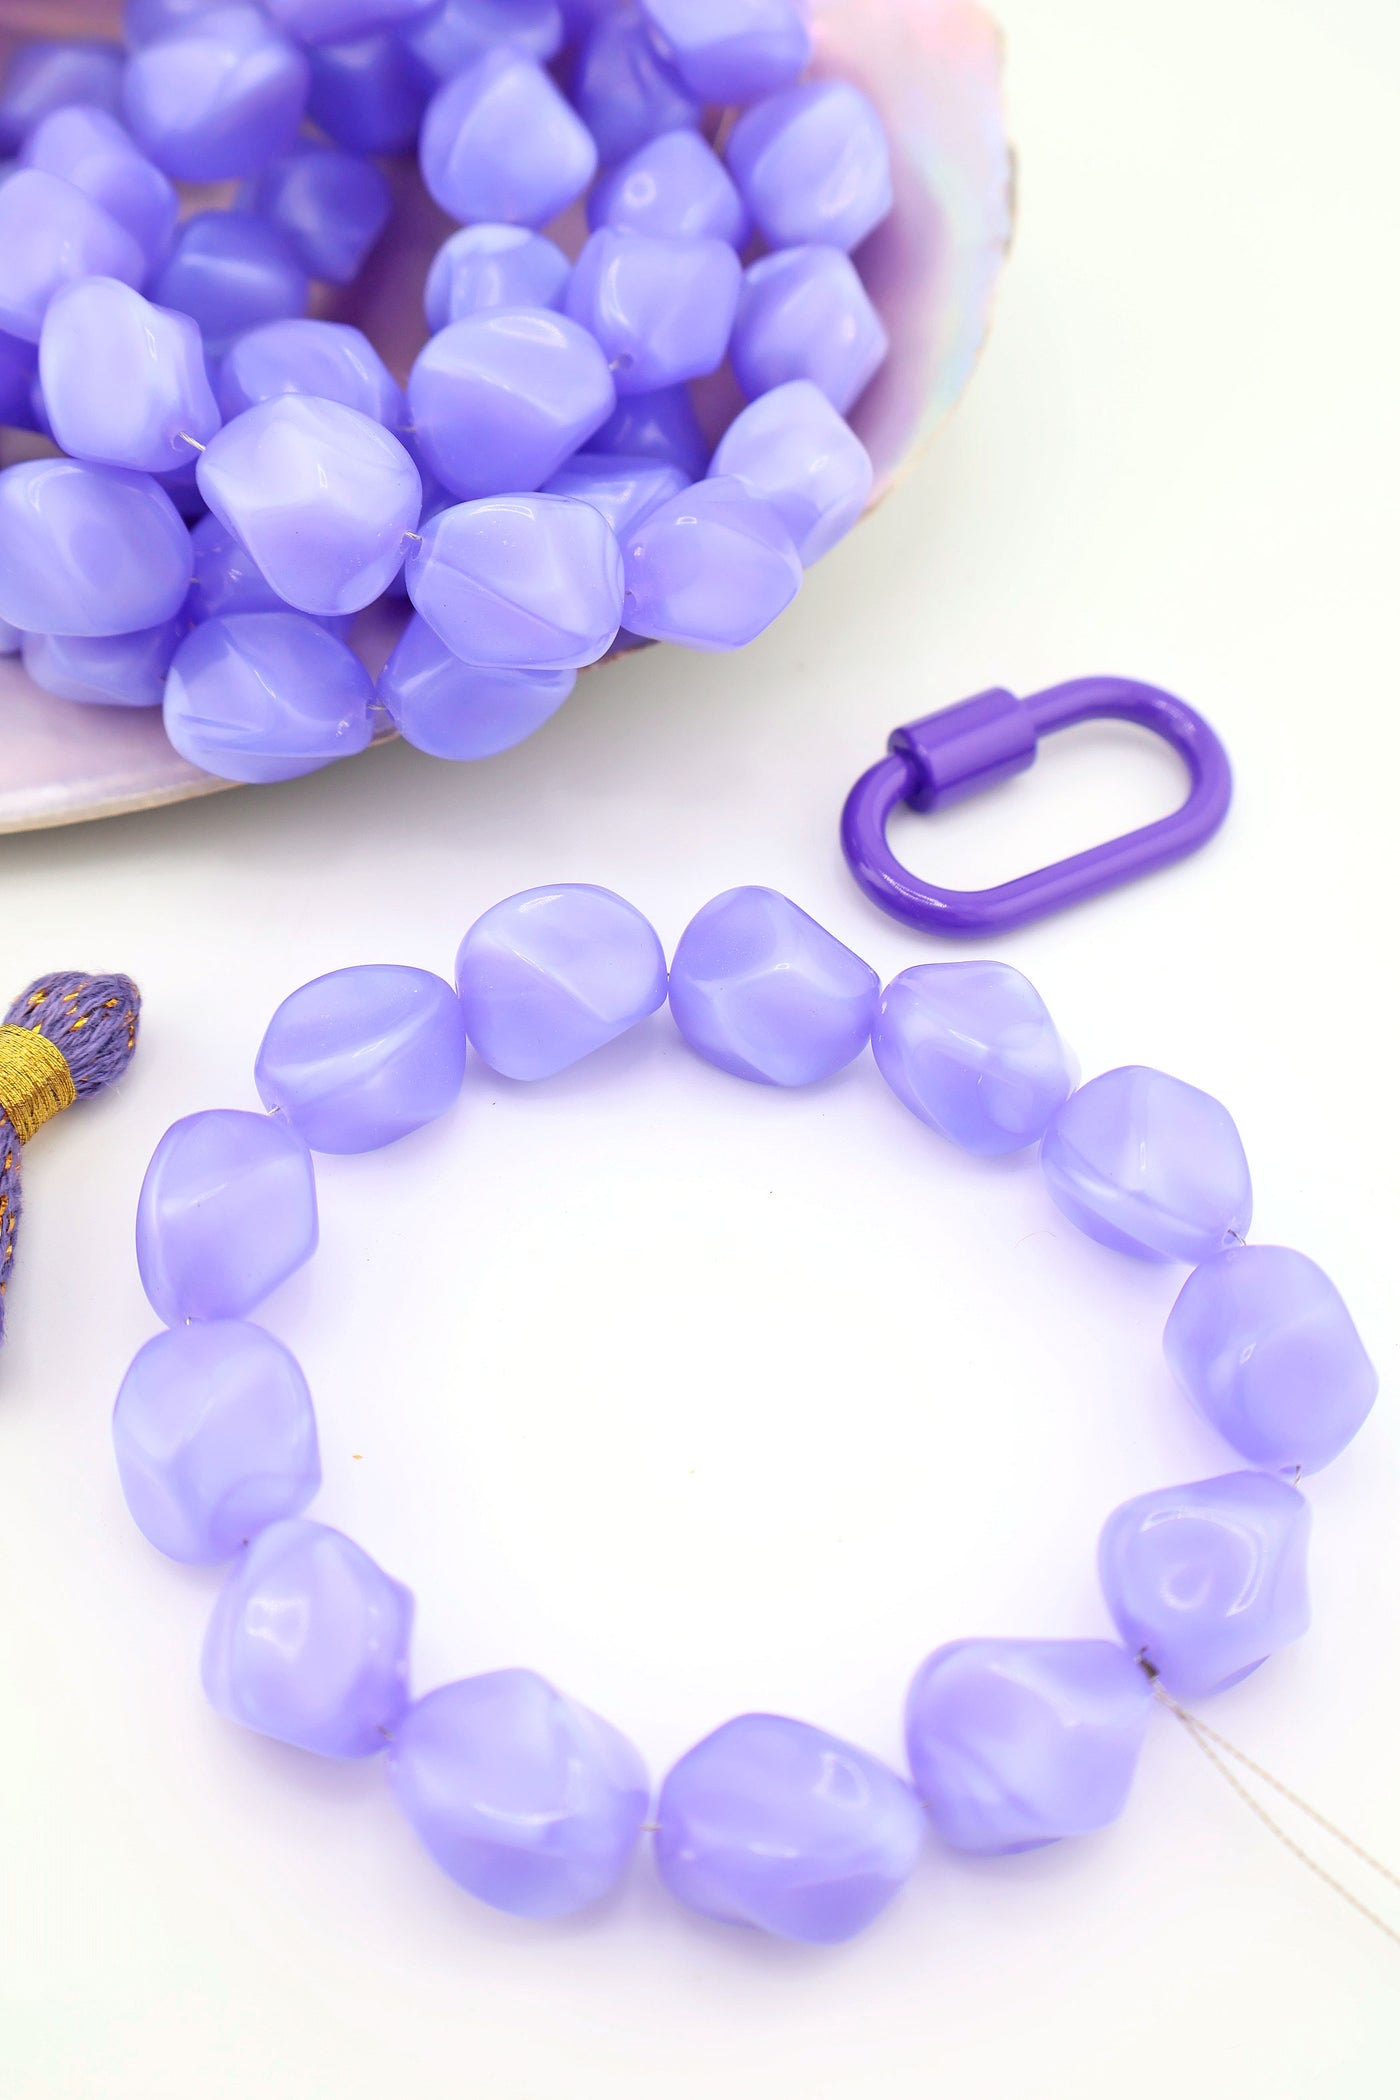 Lilac Purple Vintage Lucite Nugget Beads, 14-16mm, 13 beads for retro style DIY beaded bracelets